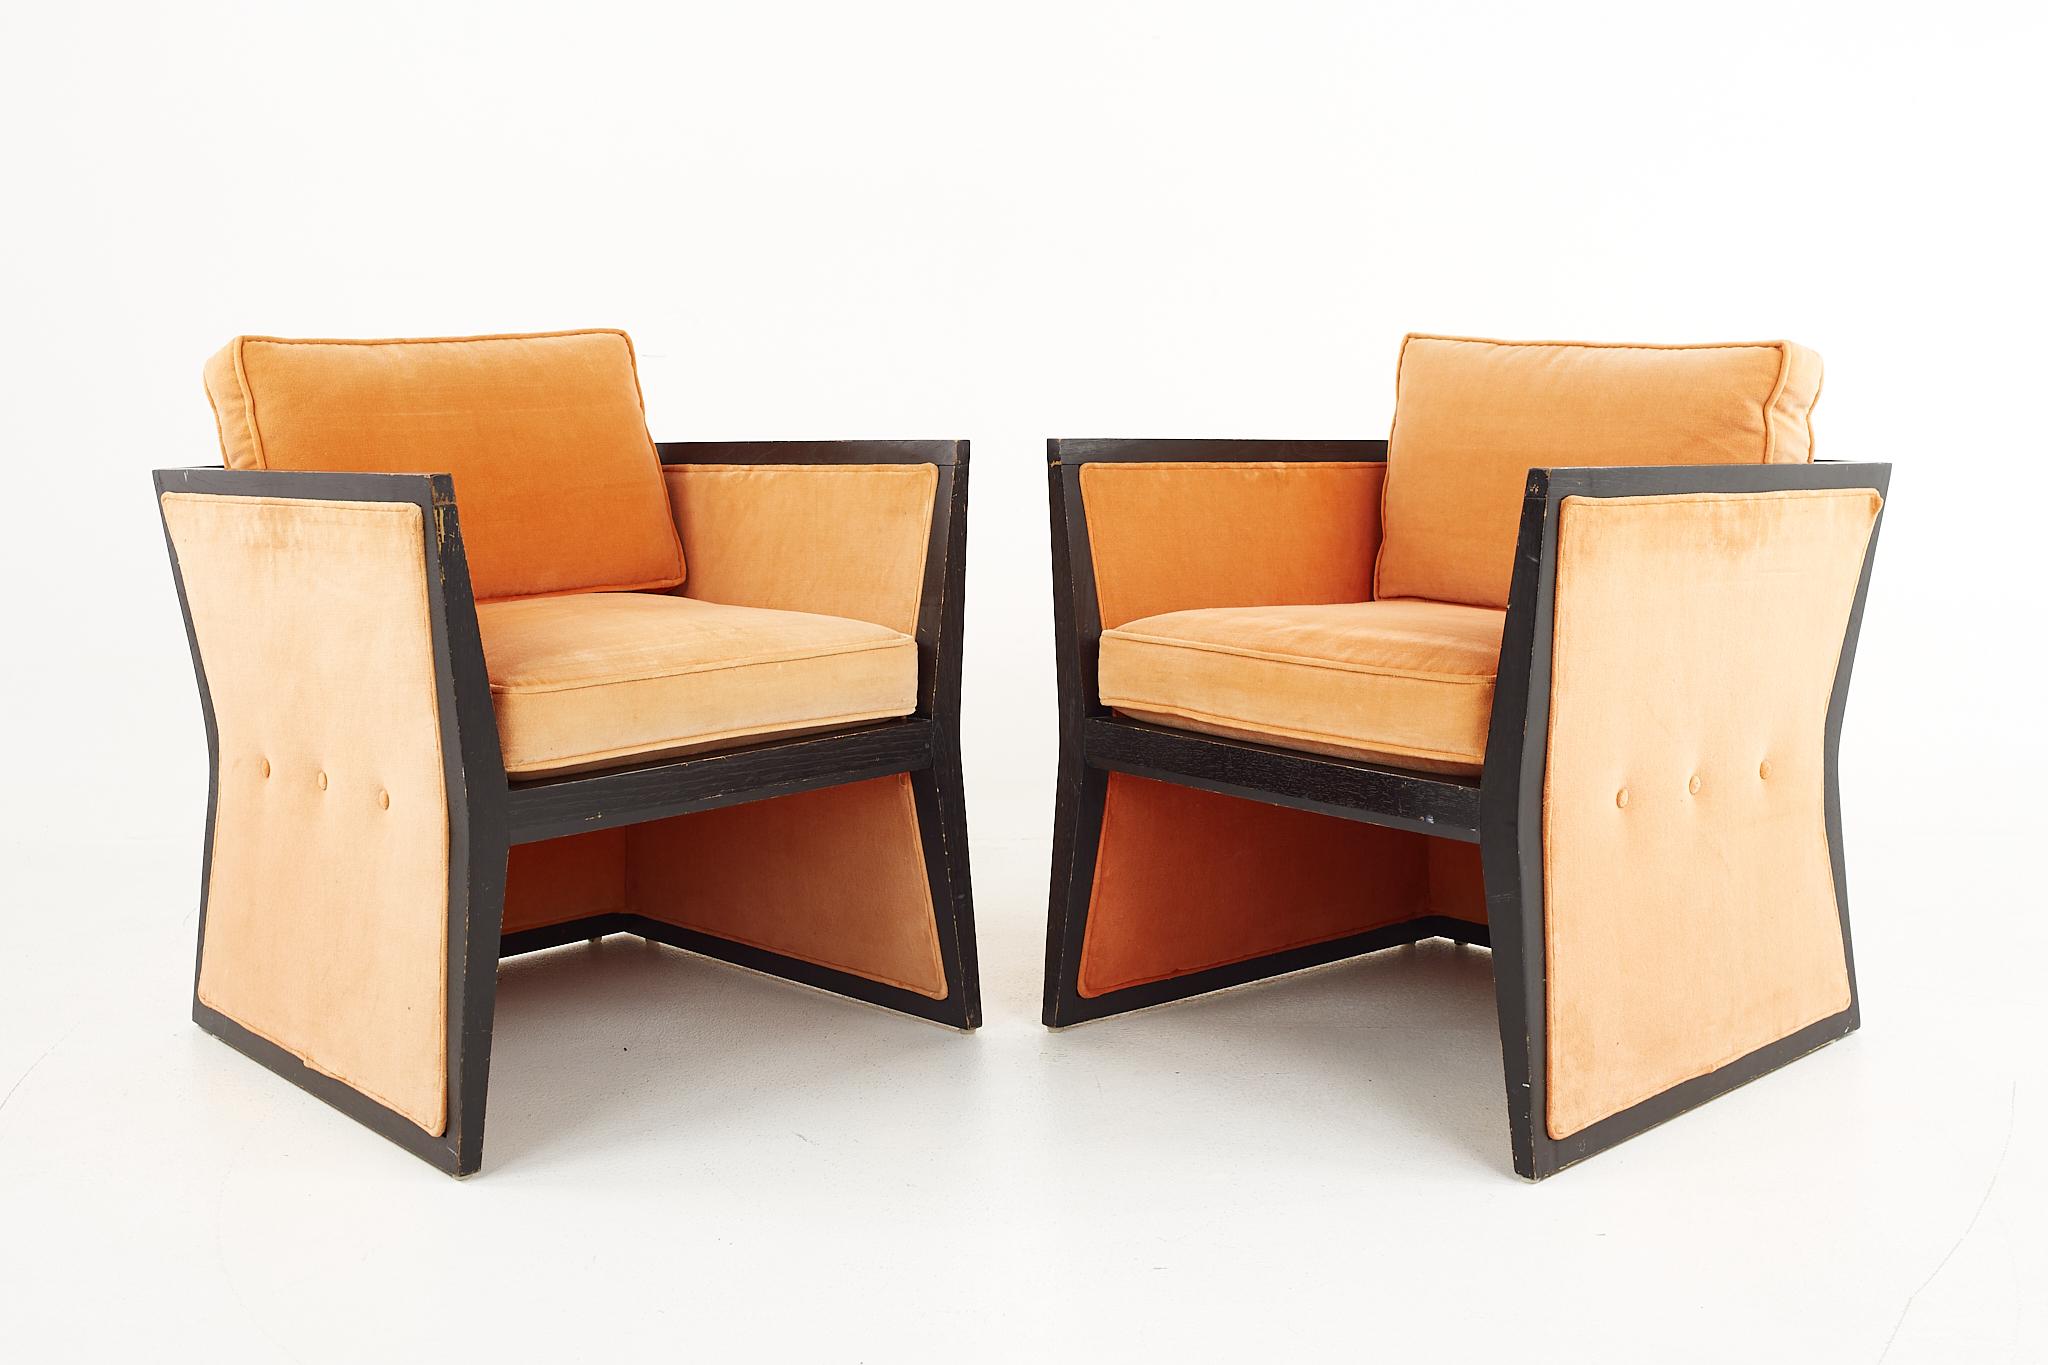 Harvey Probber style mid-century lounge chairs - a pair

Each chair measures: 26.5 wide x 26 deep x 30 high, with a seat height of 18 inches and arm height of 25.25

All pieces of furniture can be had in what we call restored vintage condition.